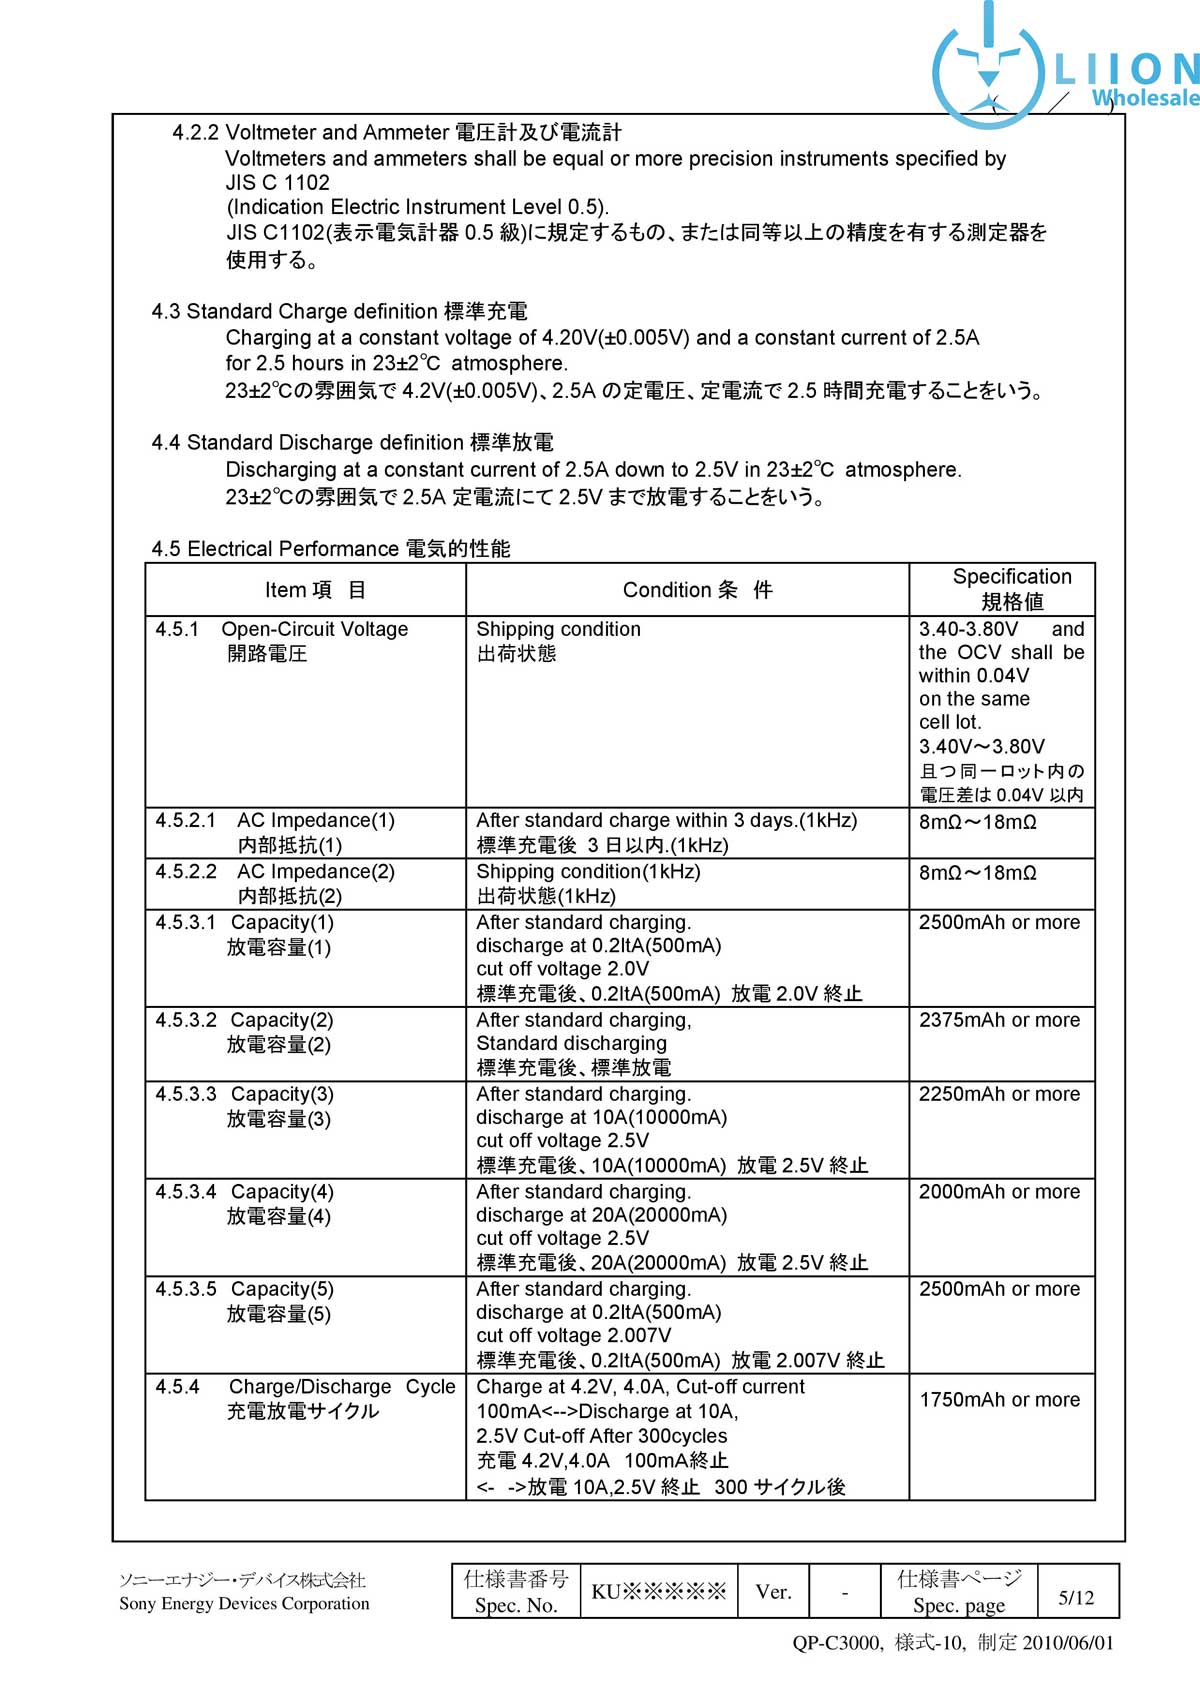 US18650 VTC5 specification page 5